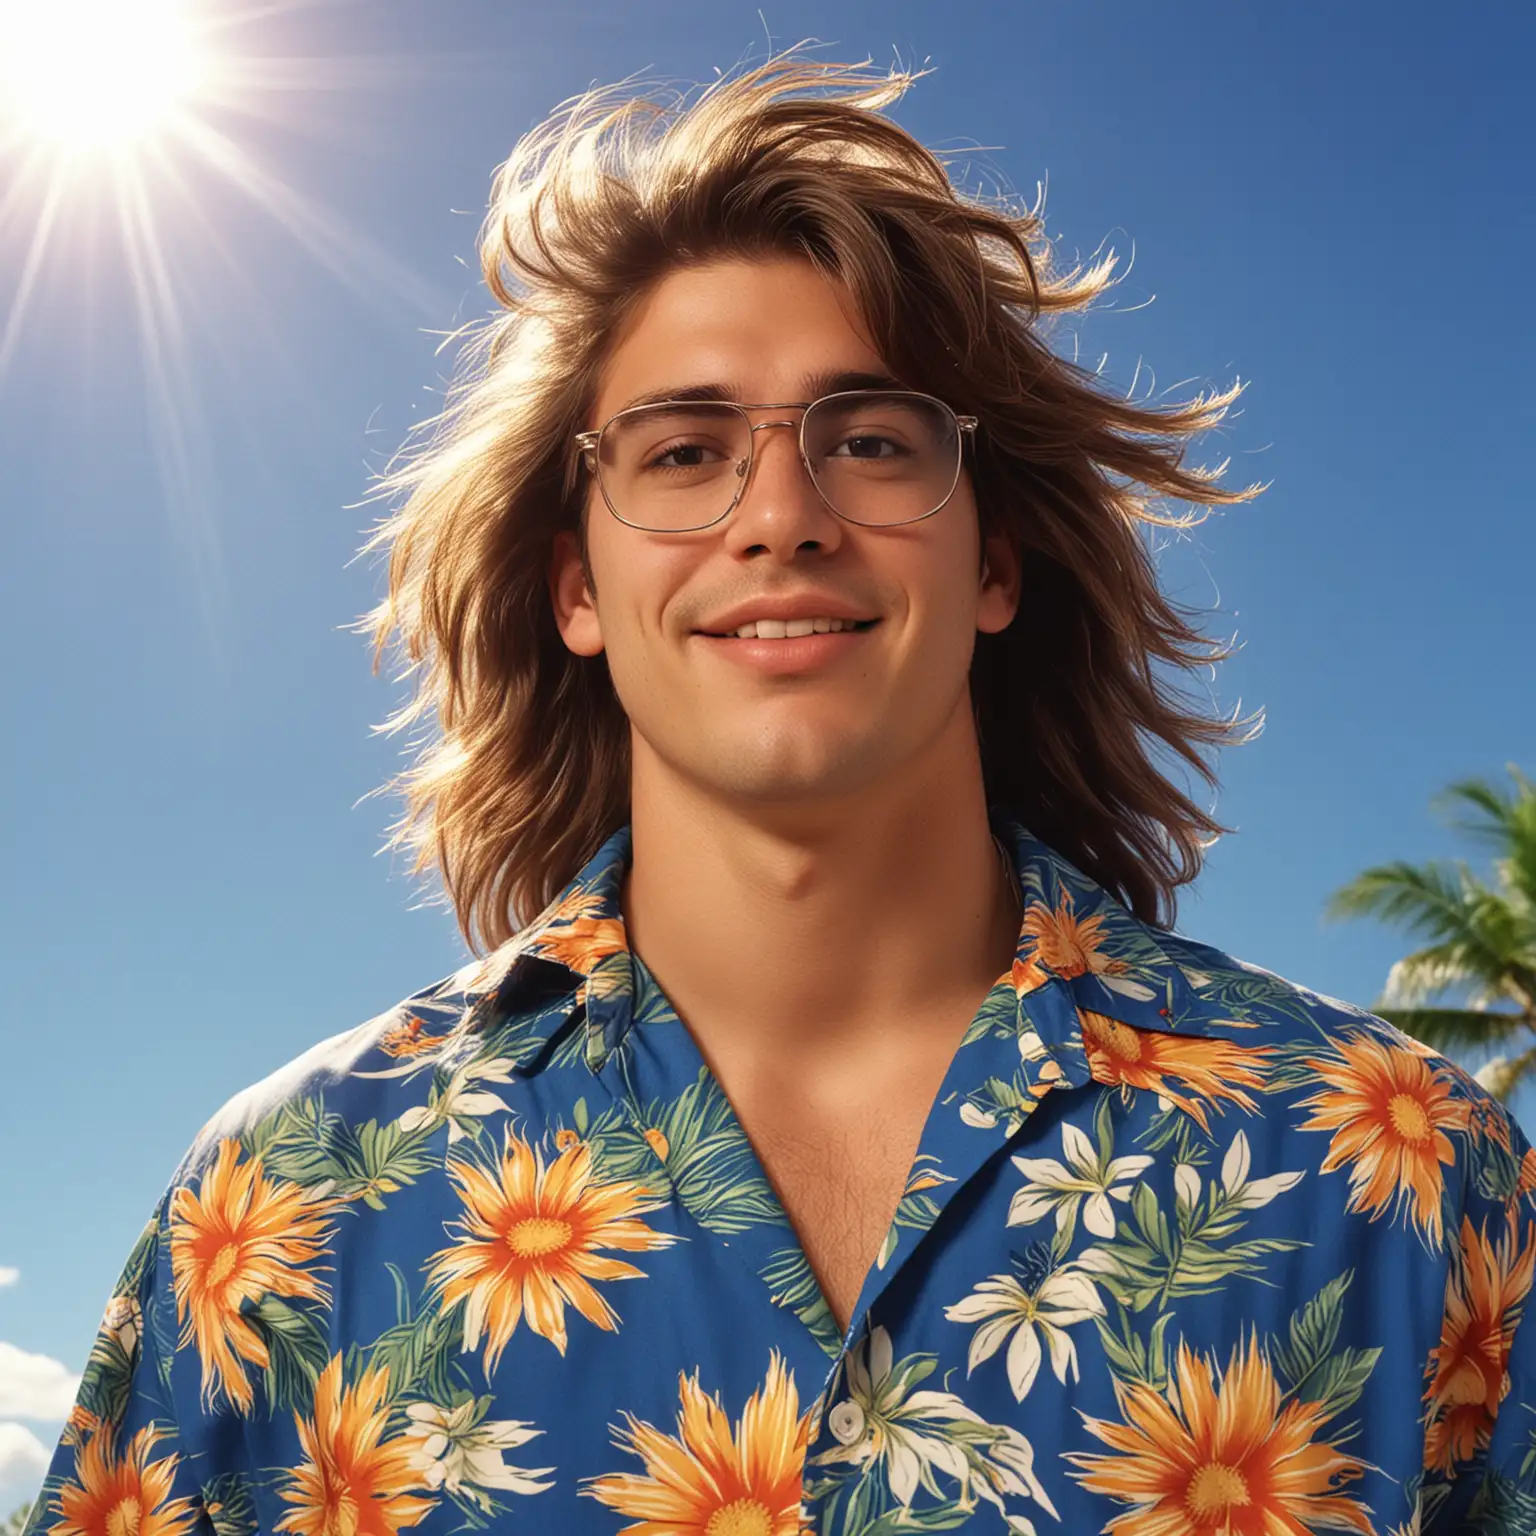 Retro 90s Young Man with Thick Hair and Hawaiian Shirt Under Sunshine